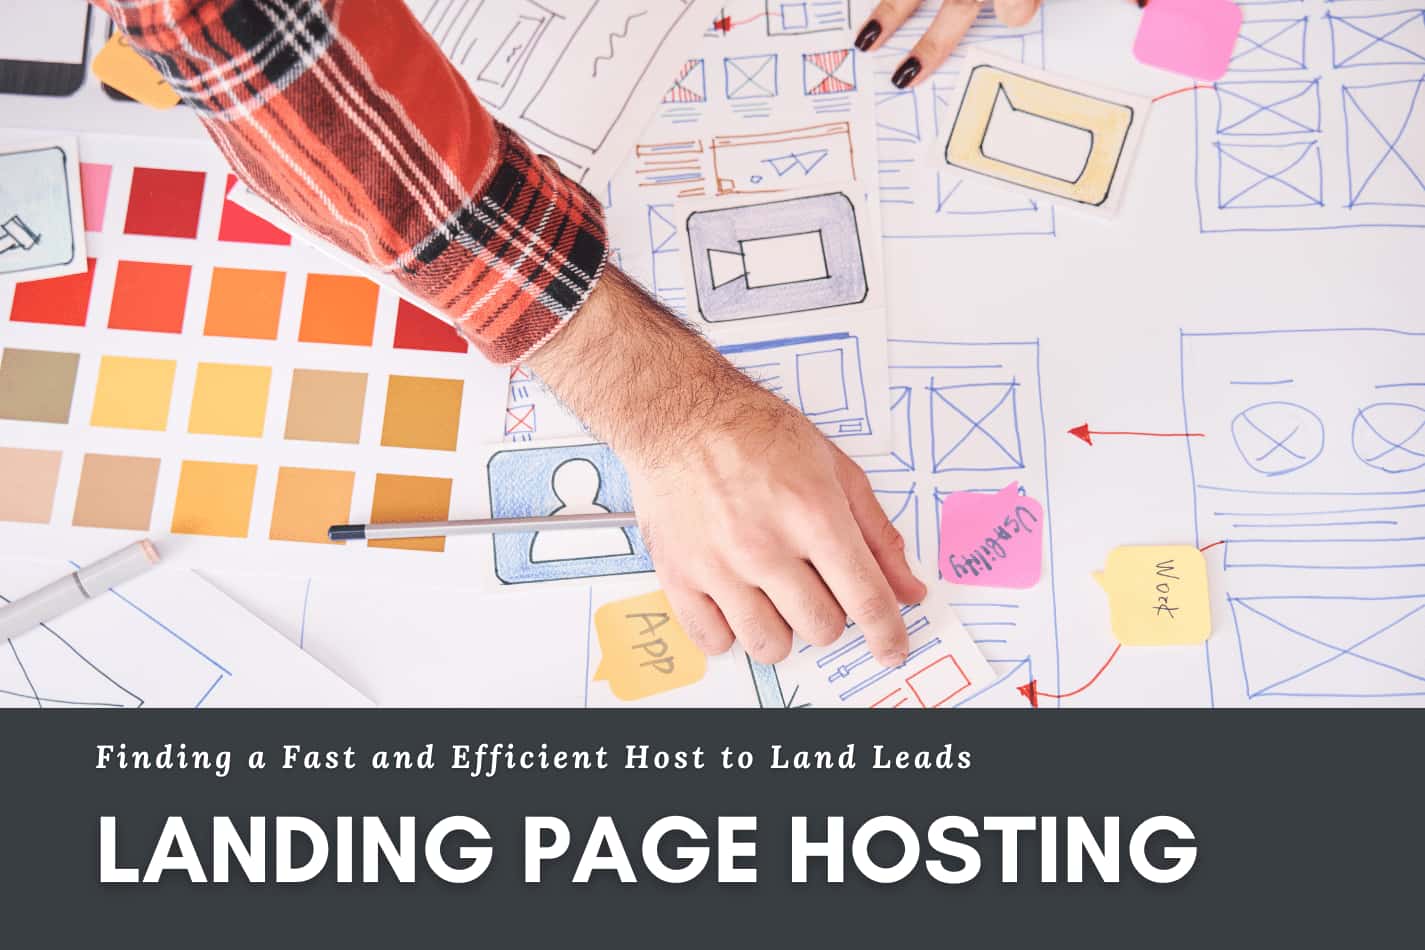 What to Look for in a Landing Page Hosting Provider